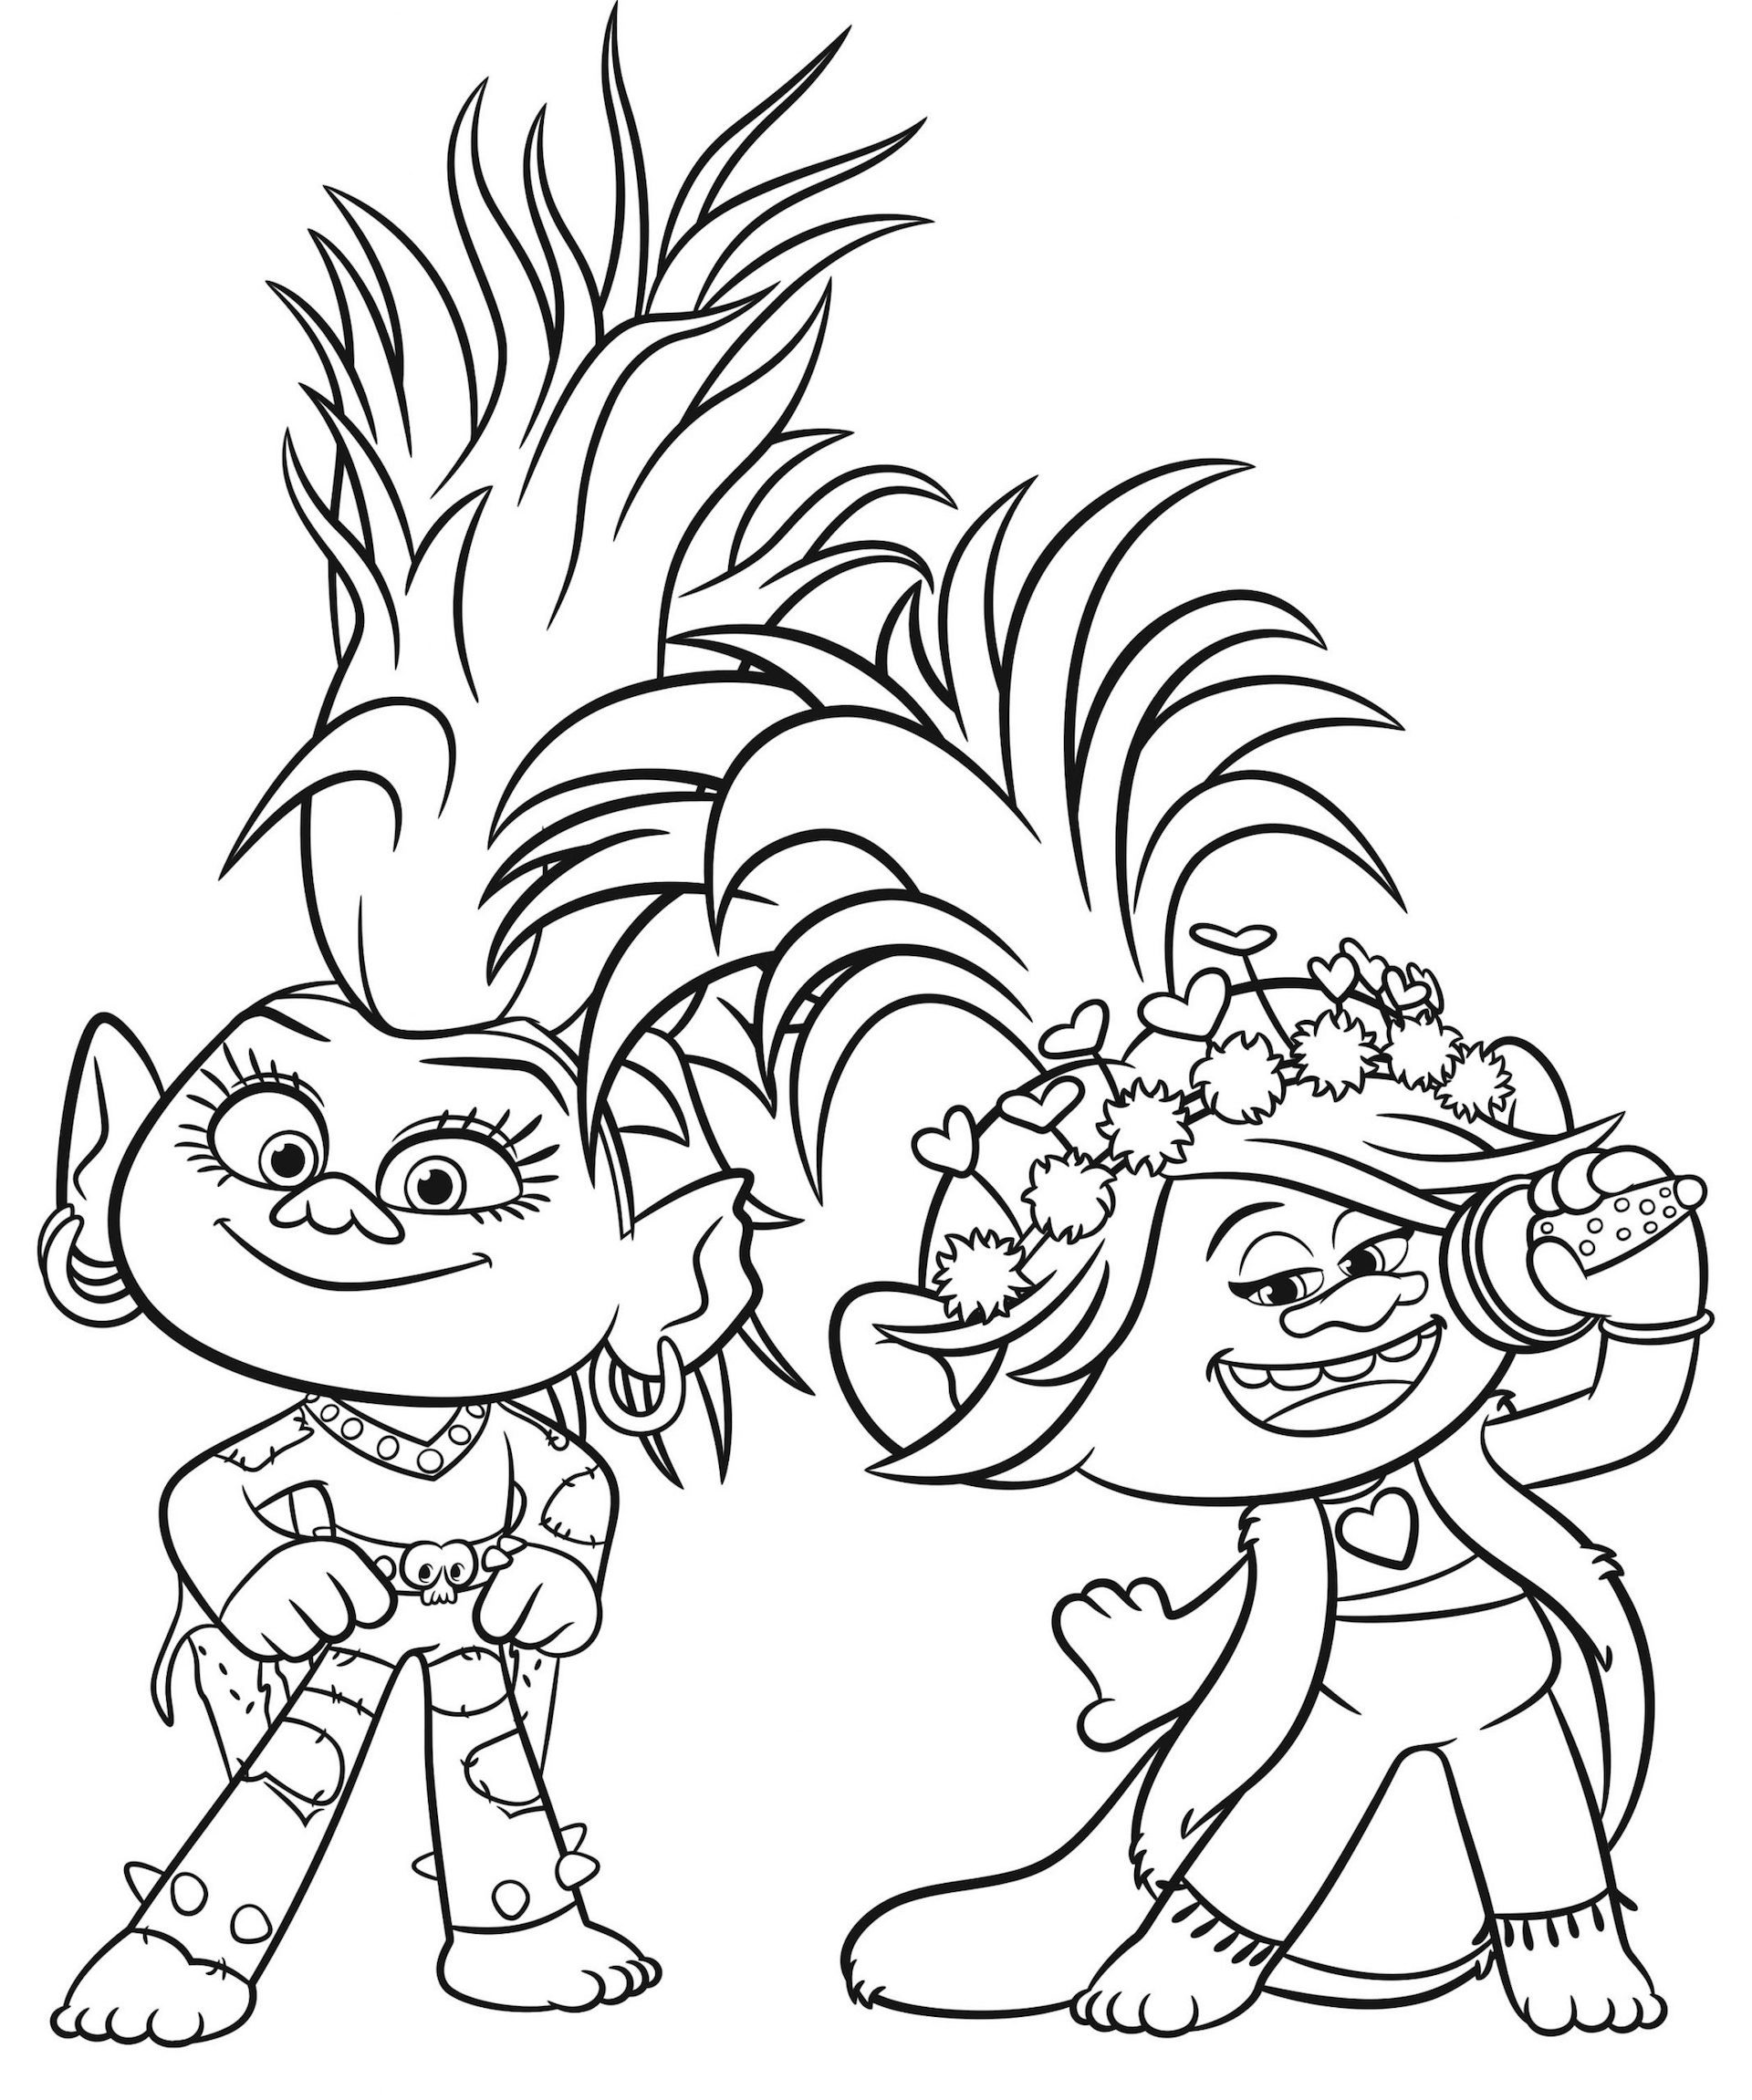 Trolls Coloring Page & Book For Kids 